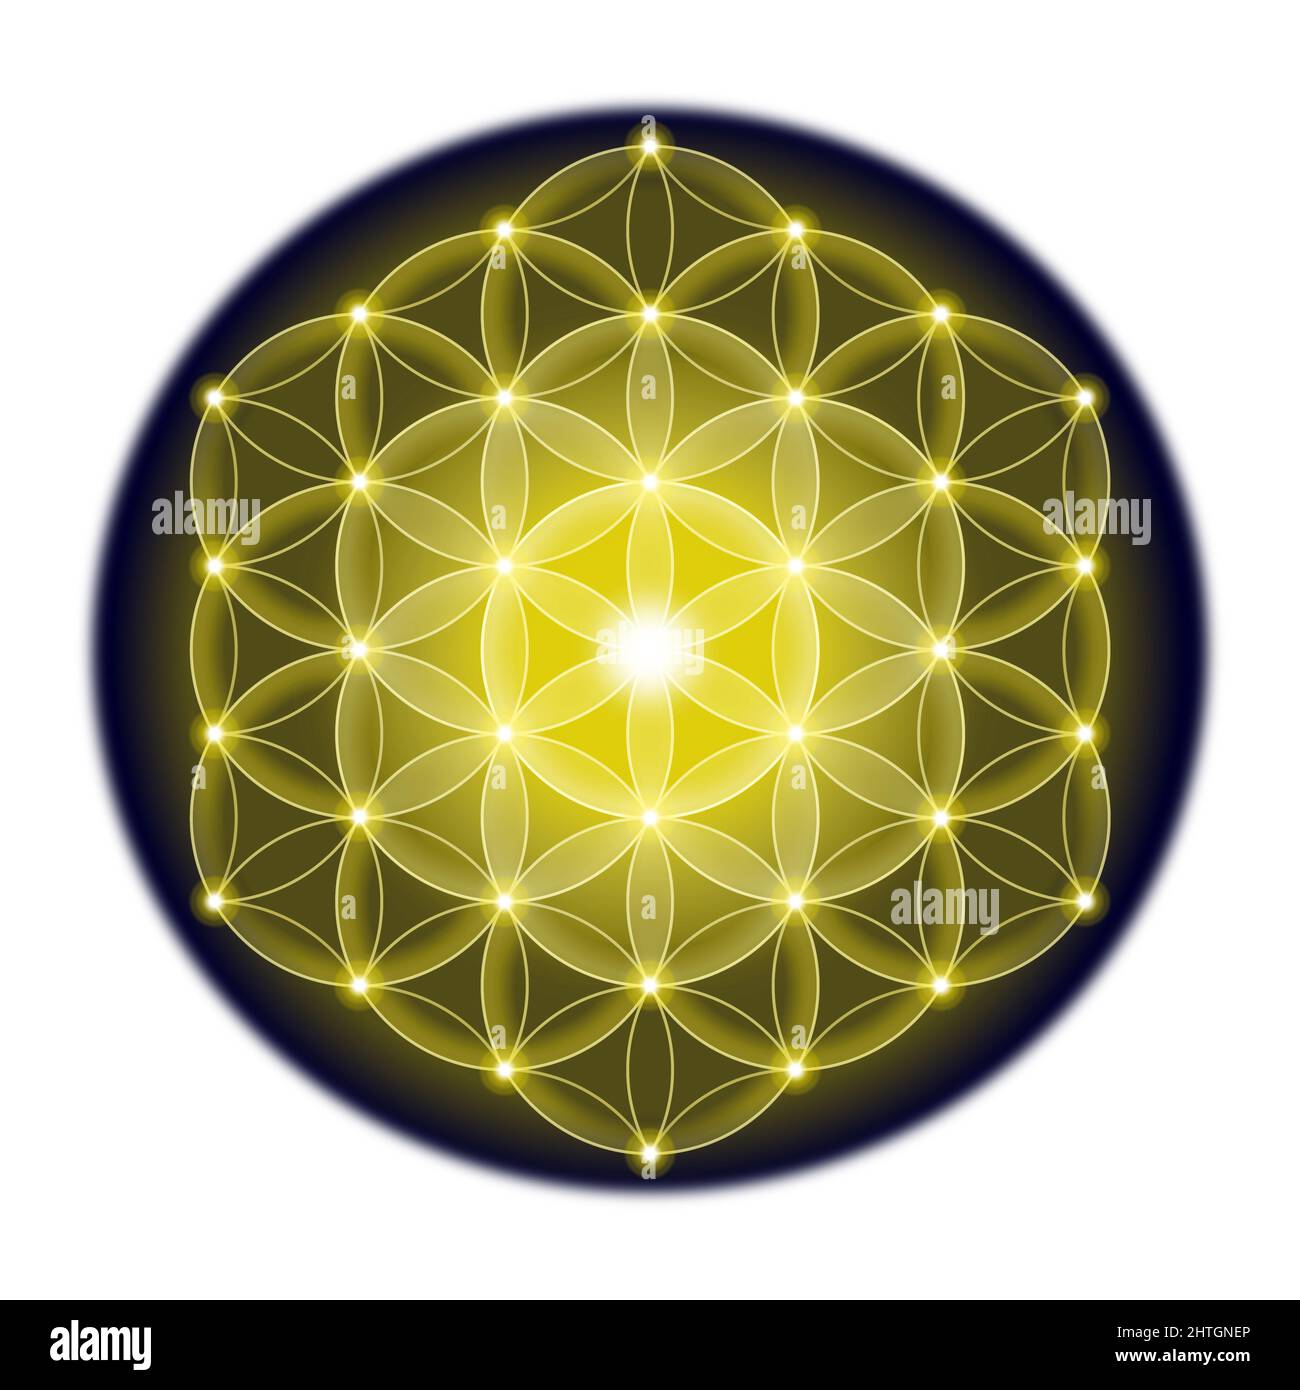 Golden Flower of Life on a black, circle shaped background. Geometric figure and ancient spiritual symbol of Sacred Geometry. Overlapping circles. Stock Photo